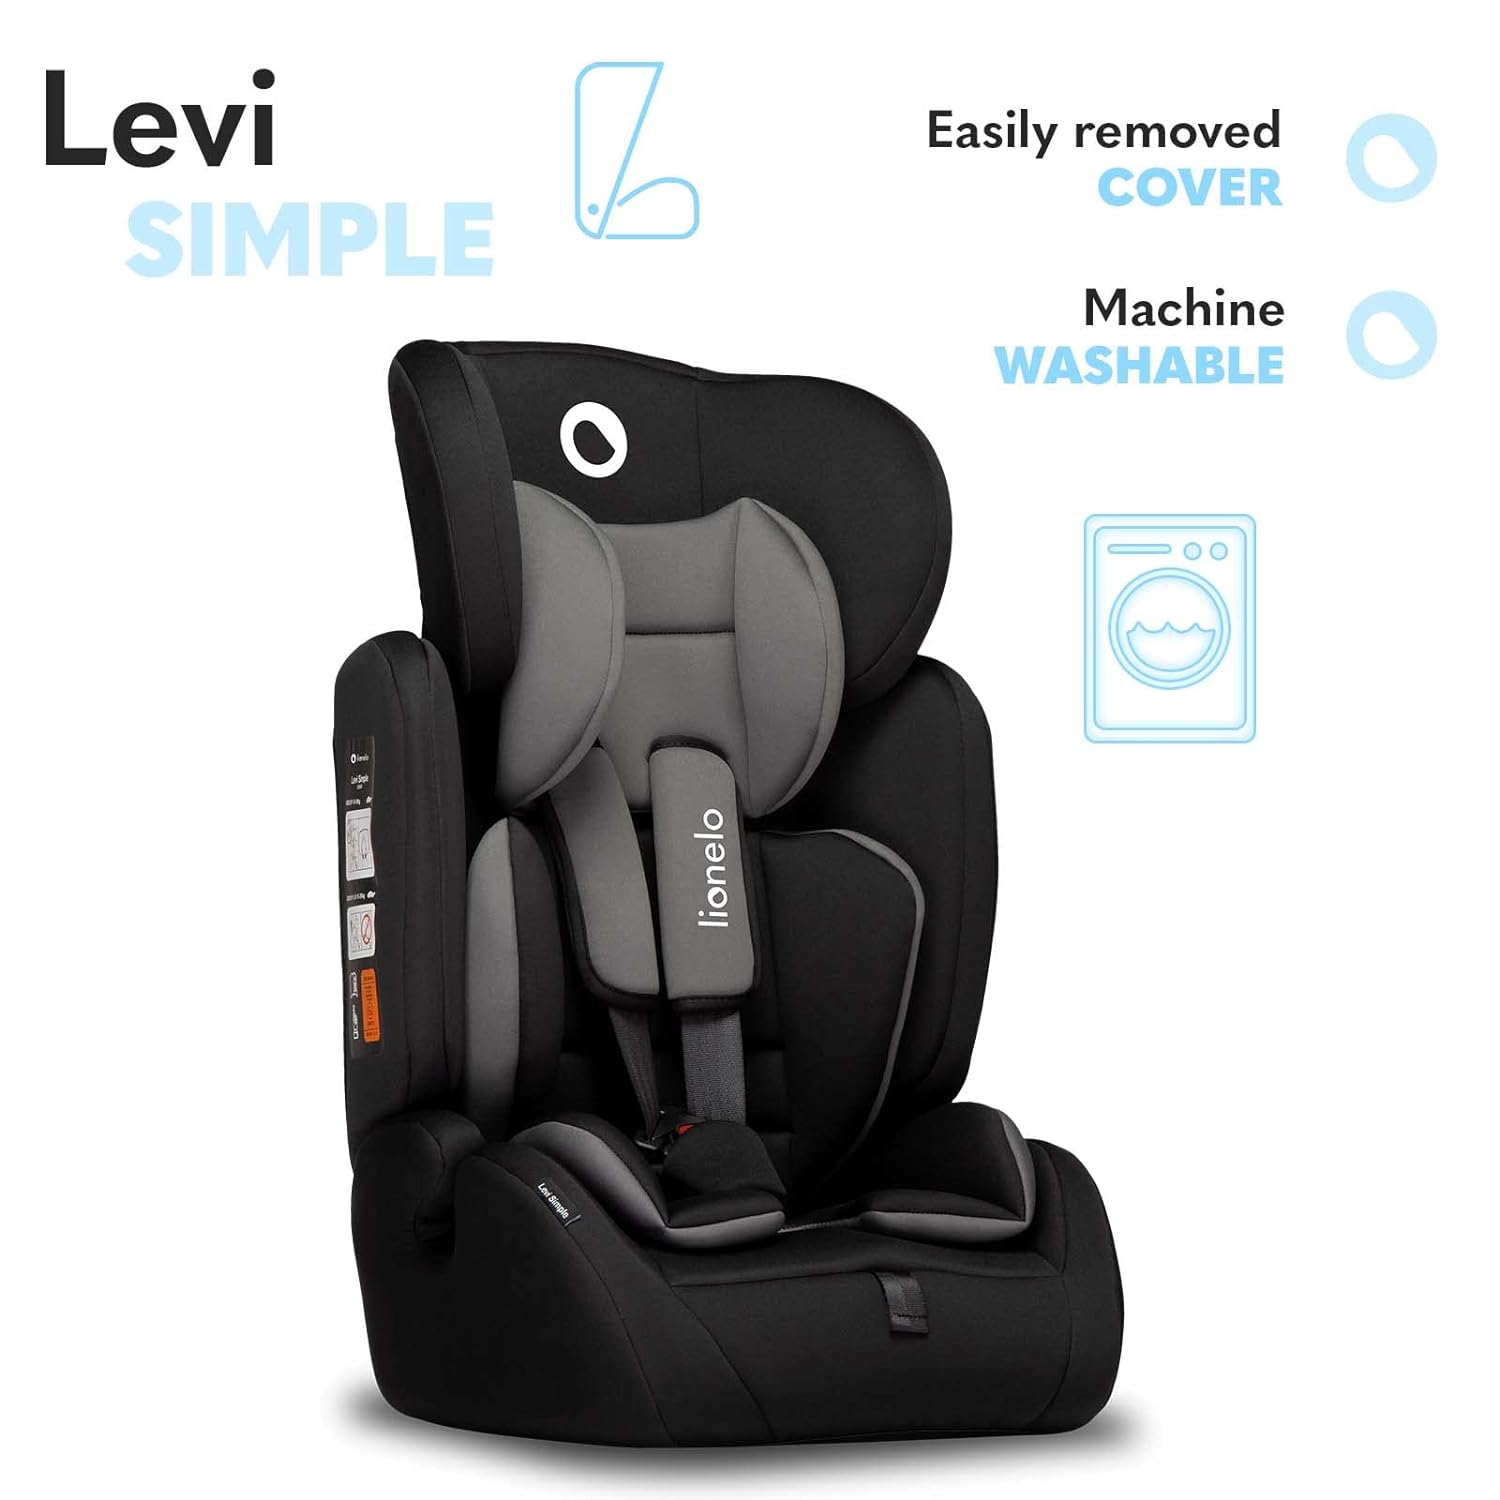 LIONELO Levi Simple Child Seat 9-36 kg, Car Seat, Height-Adjustable, Recessed Headrest, Side Protection, Removable Backrest, Seat Reducer, 5-Point Straps (Sporty Black)